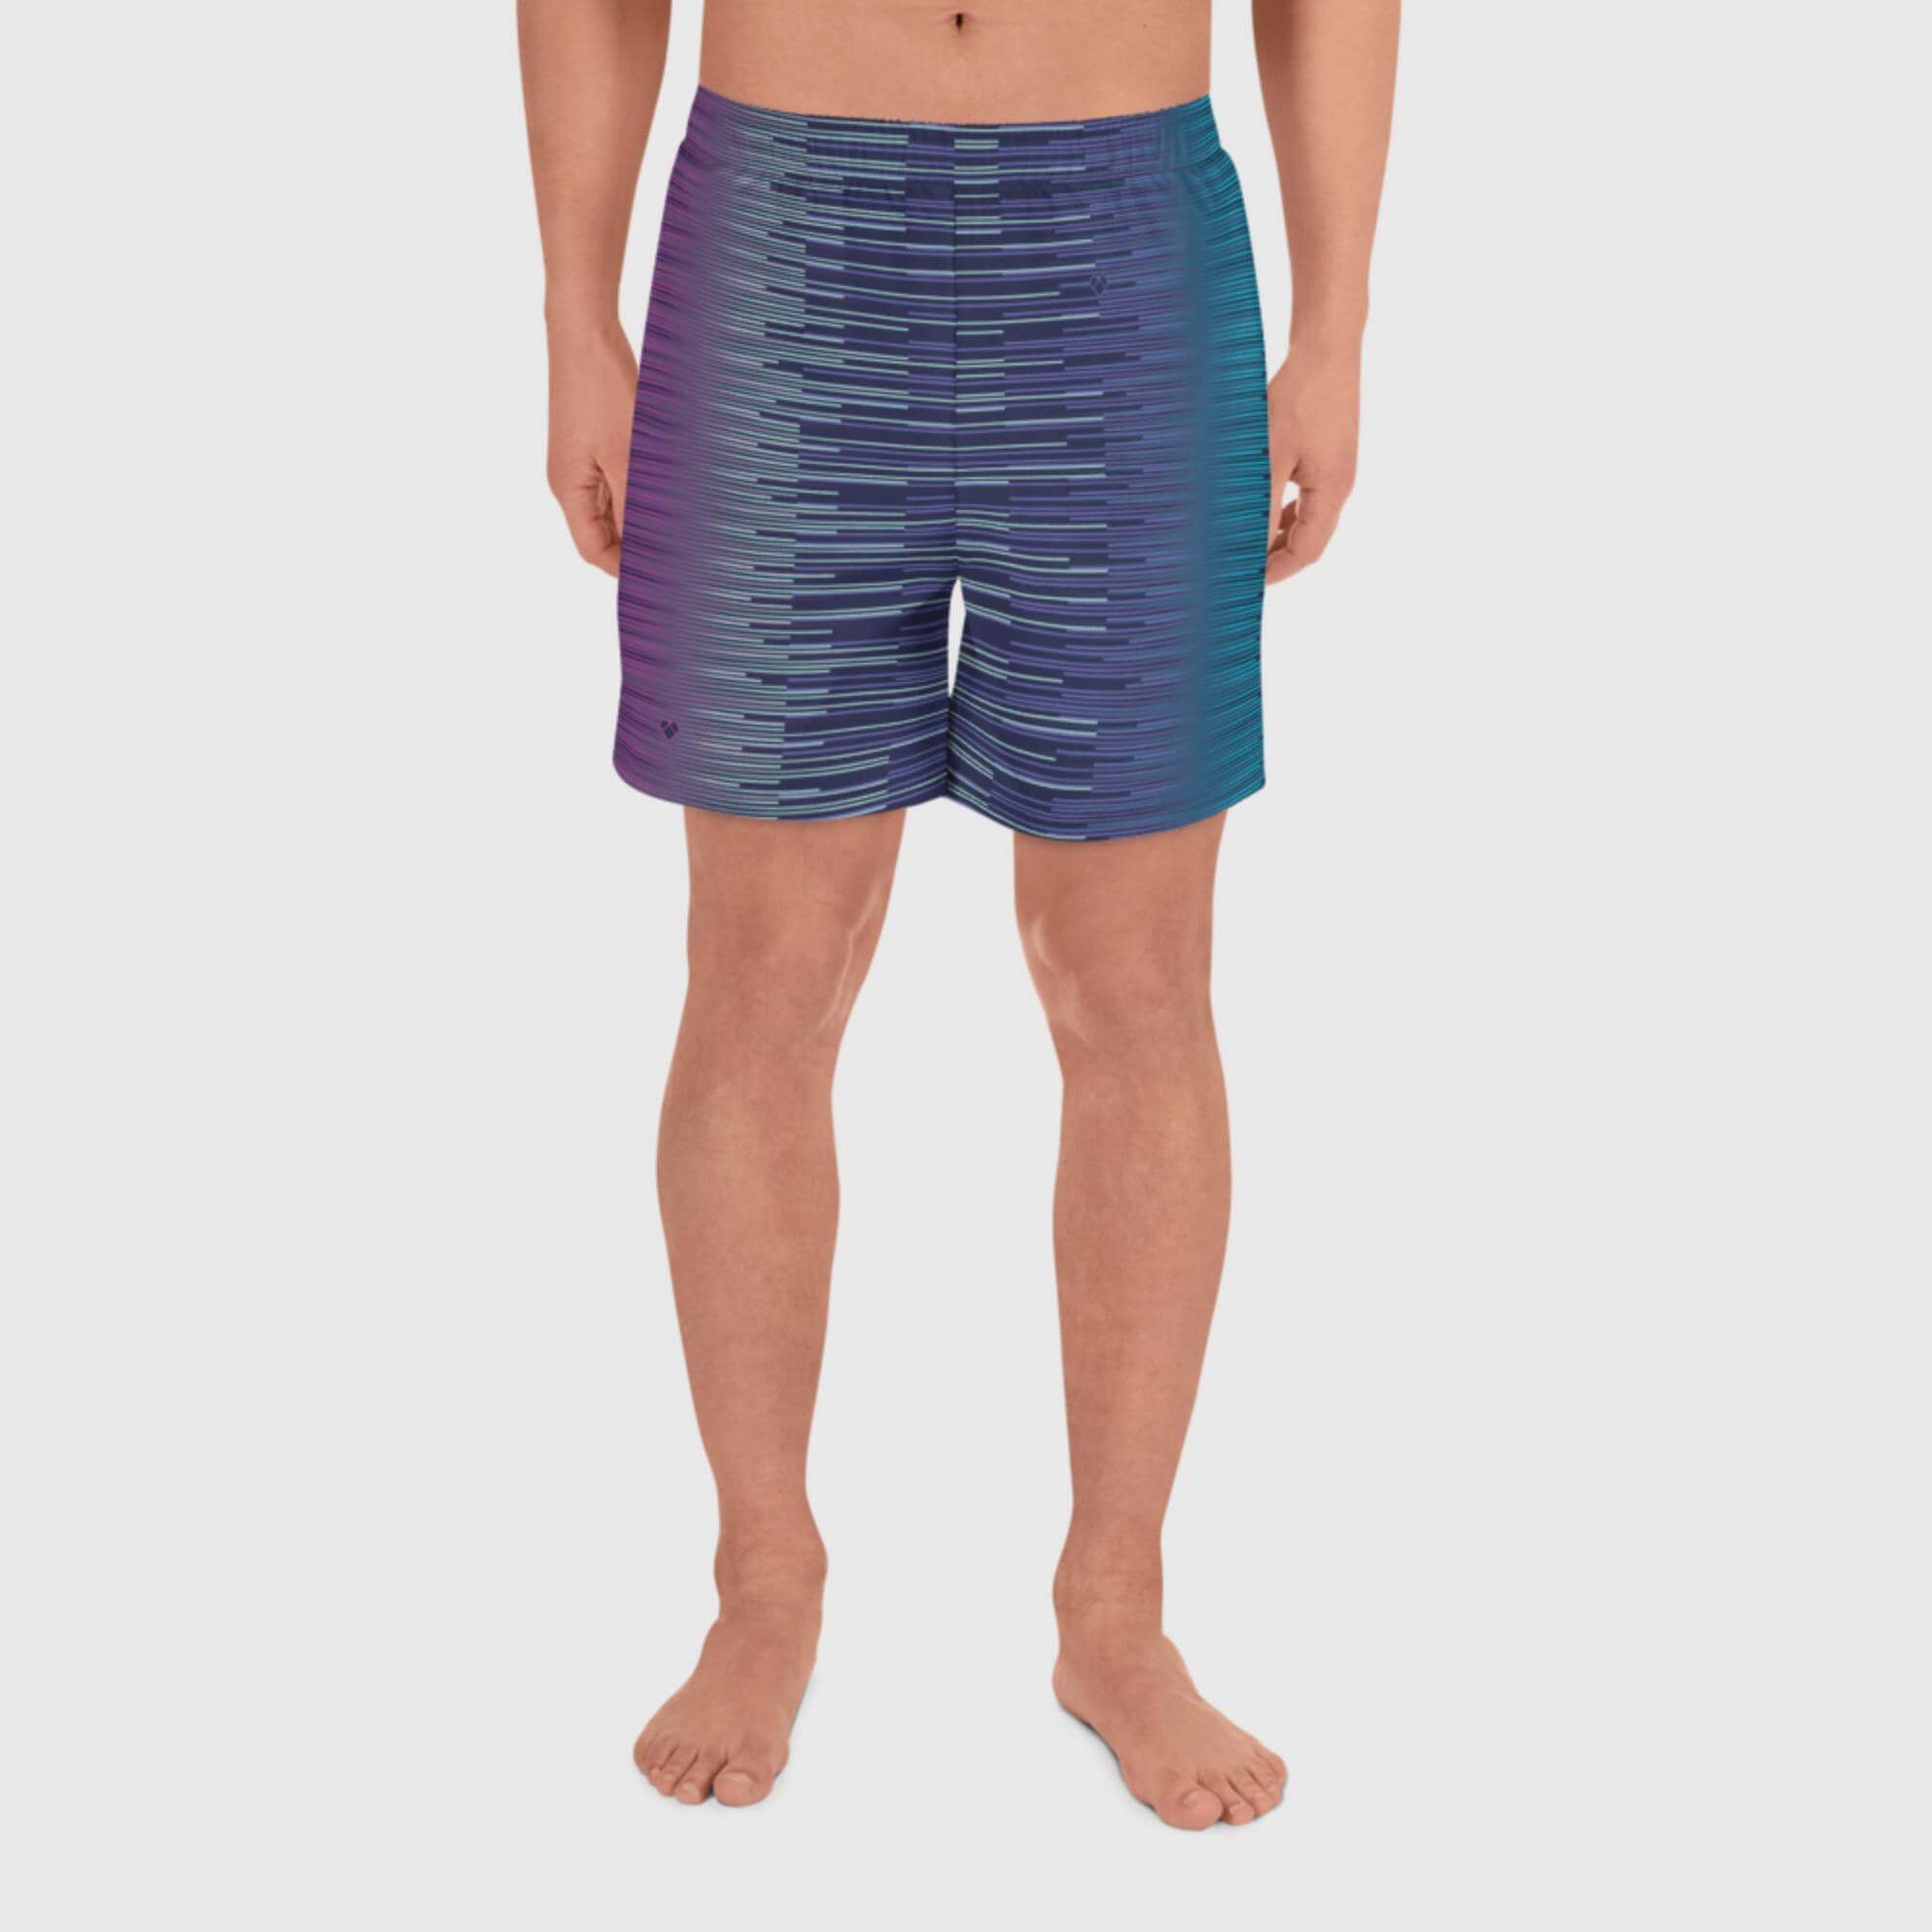 Amor Dual Collection: Dark Slate Blue Sports Shorts